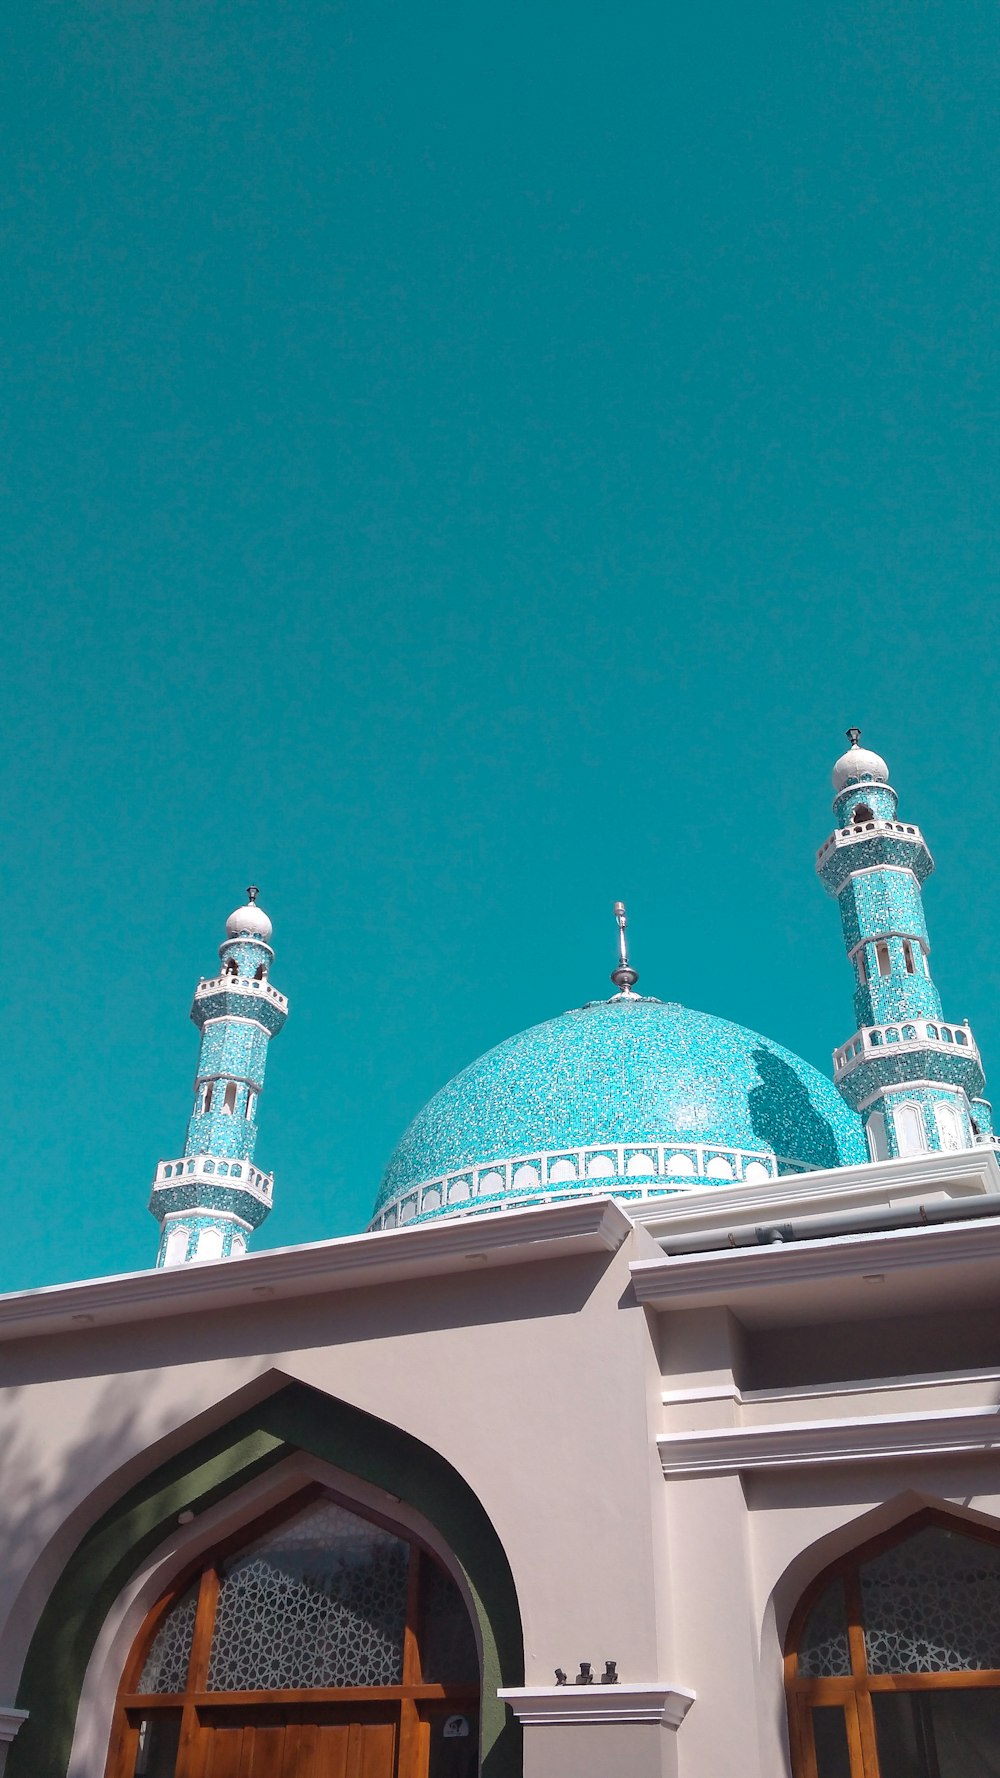 teal and white mosque